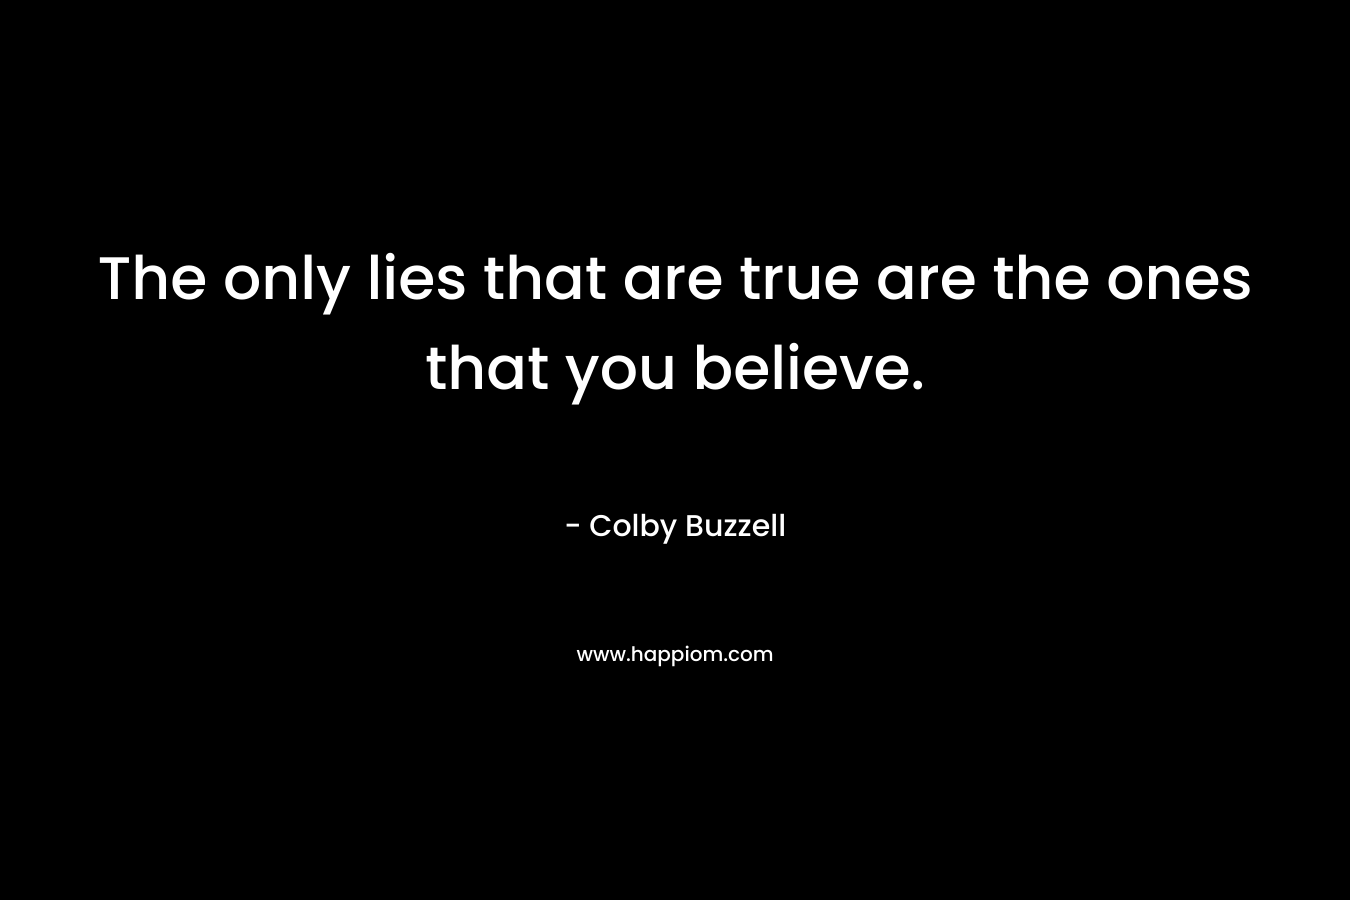 The only lies that are true are the ones that you believe.